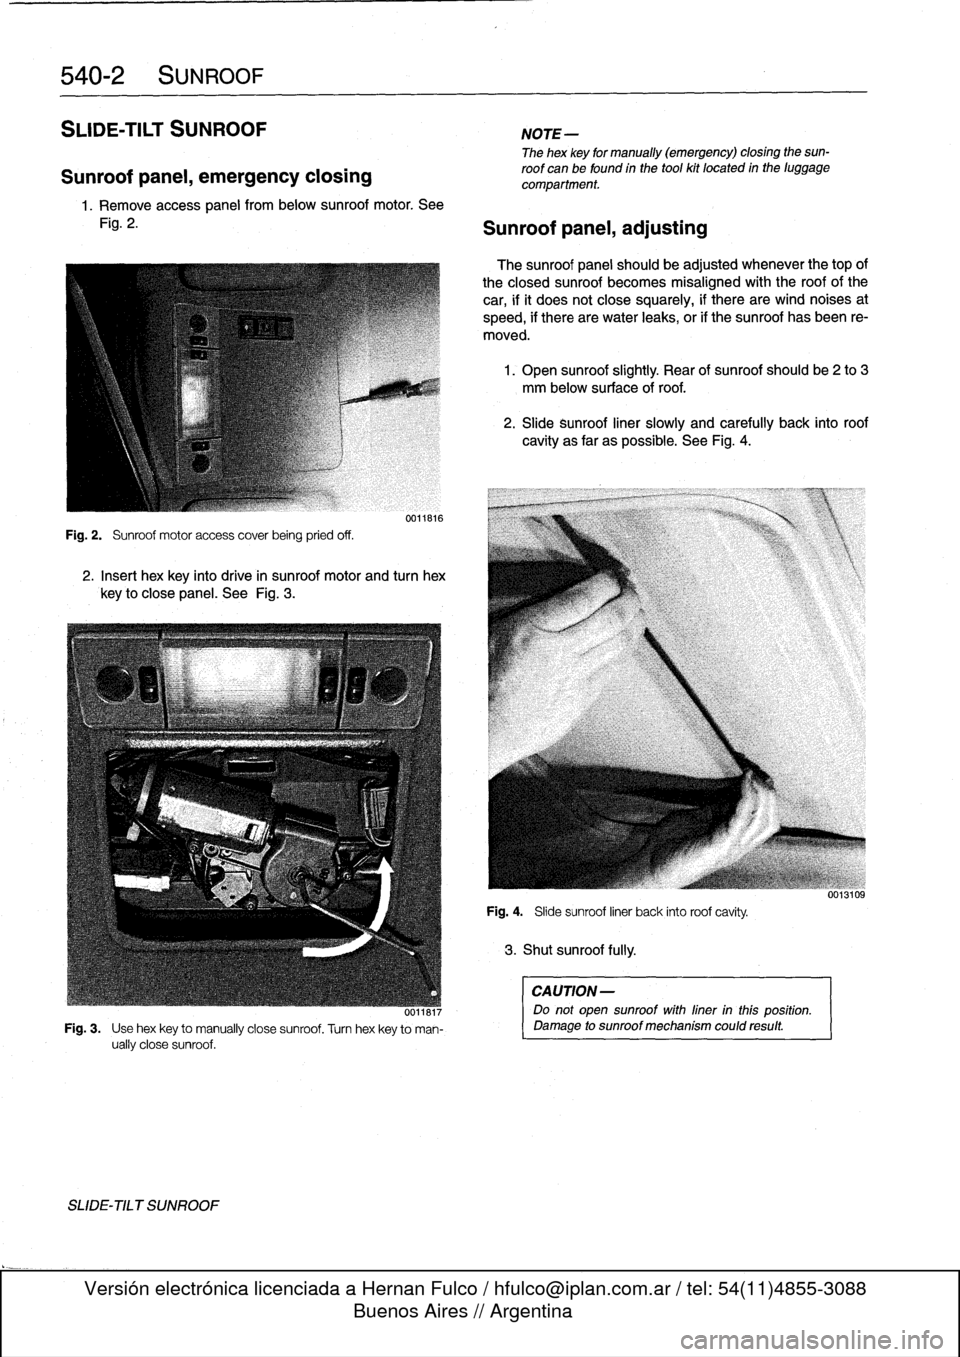 BMW M3 1992 E36 Workshop Manual 
540-2
SUNROOF

SLIDE-TILT
SUNROOF

Sunroof
panel,
emergency
closing

1.
Remove
access
panel
frombelow
sunroof
motor
.
See

Fig
.
2
.

Fig
.
2
.

	

Sunroof
motor
access
coverbeing
pried
off
.

001181